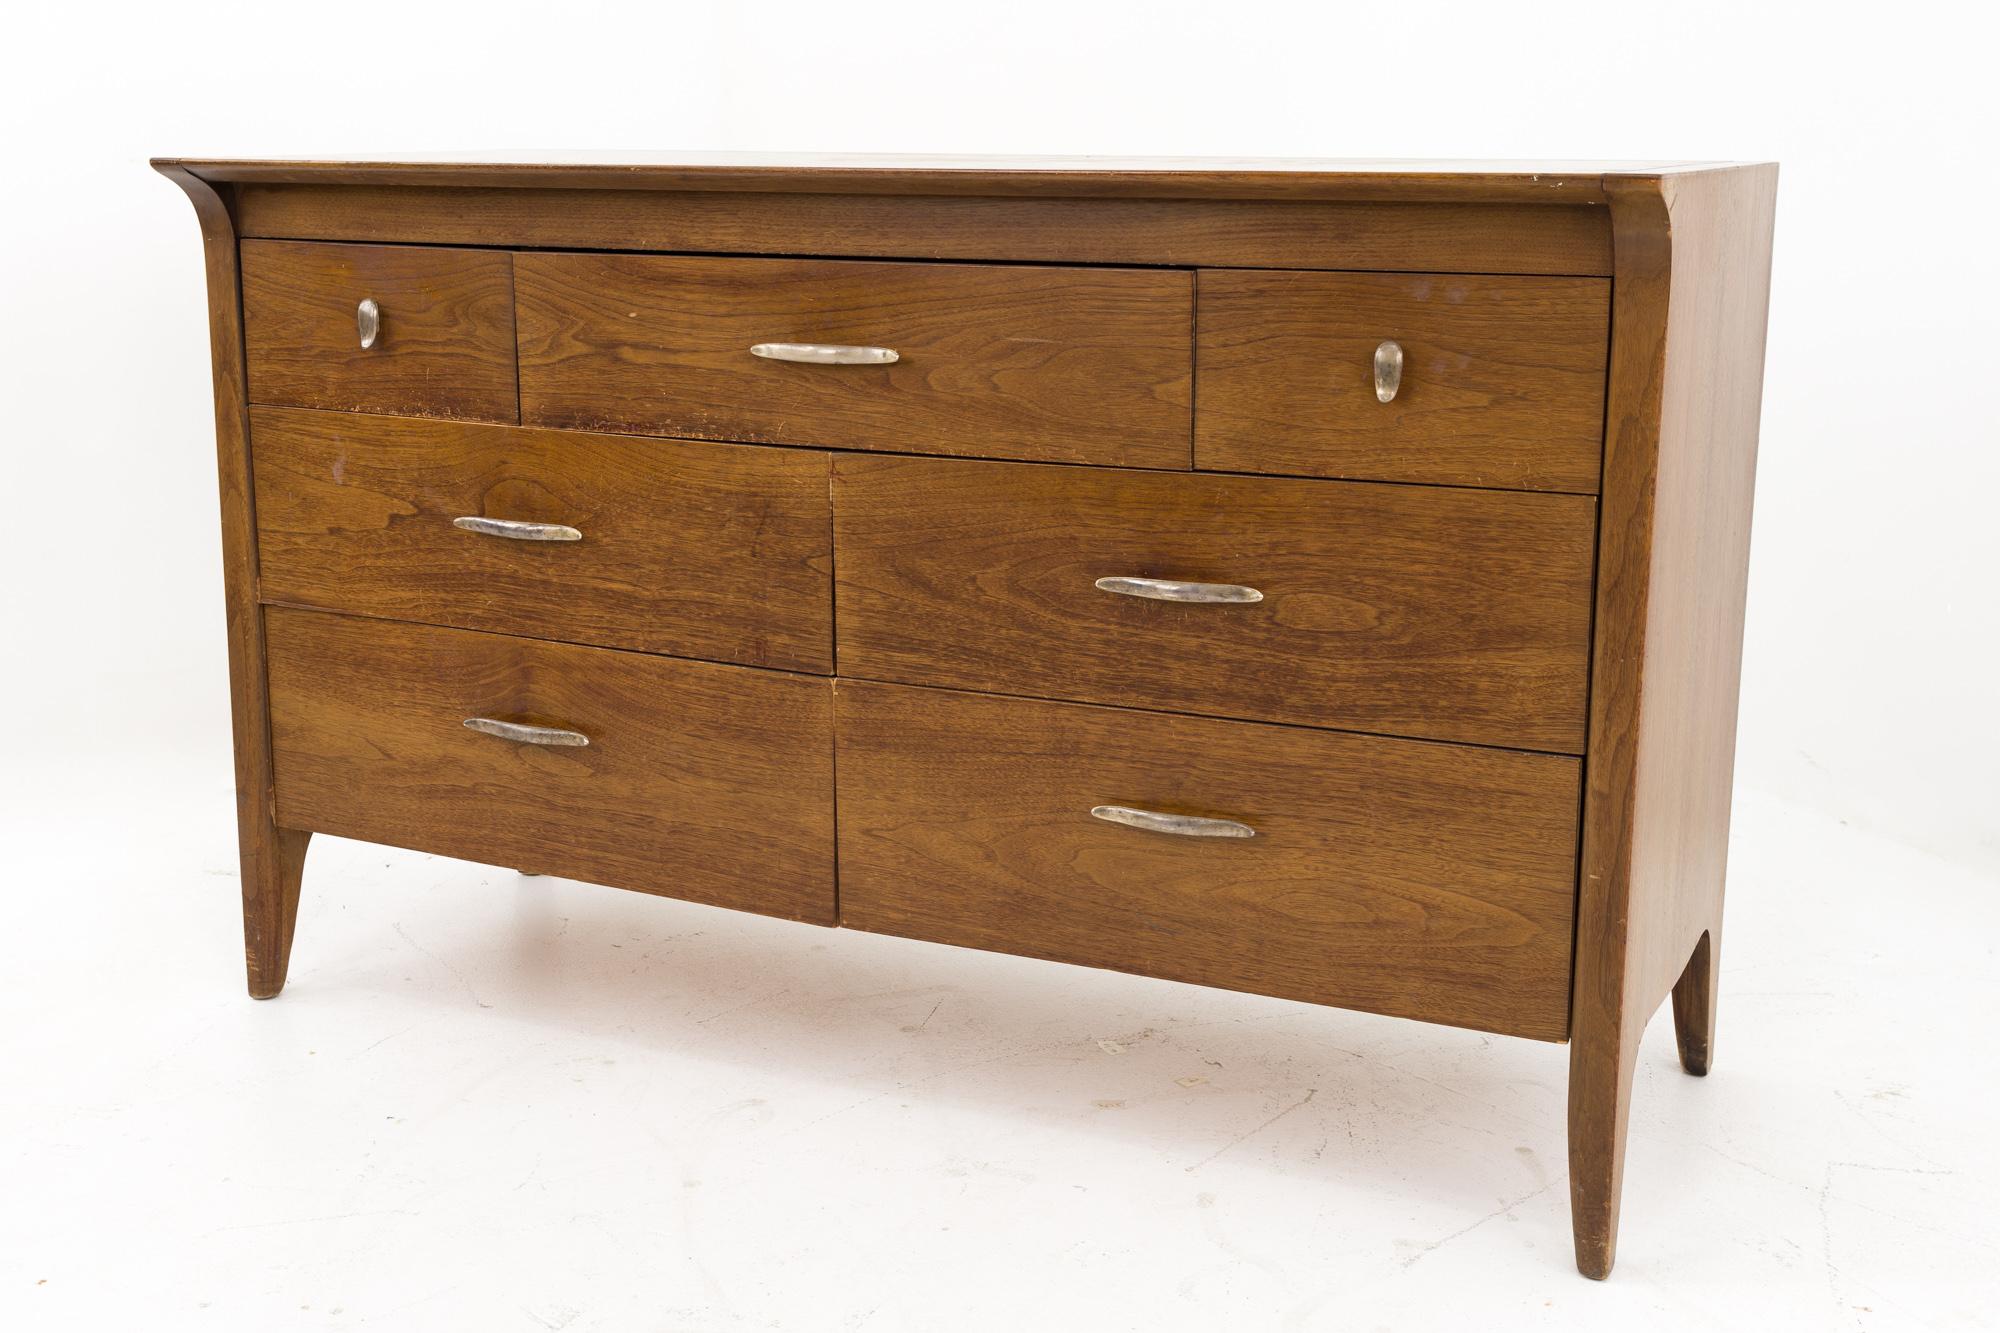 John Van Koert for Drexel profile mid century 7 drawer lowboy dresser
Dresser is: 52 wide x 21 deep x 32.5 inches high

All pieces of furniture can be had in what we call restored vintage condition. That means the piece is restored upon purchase